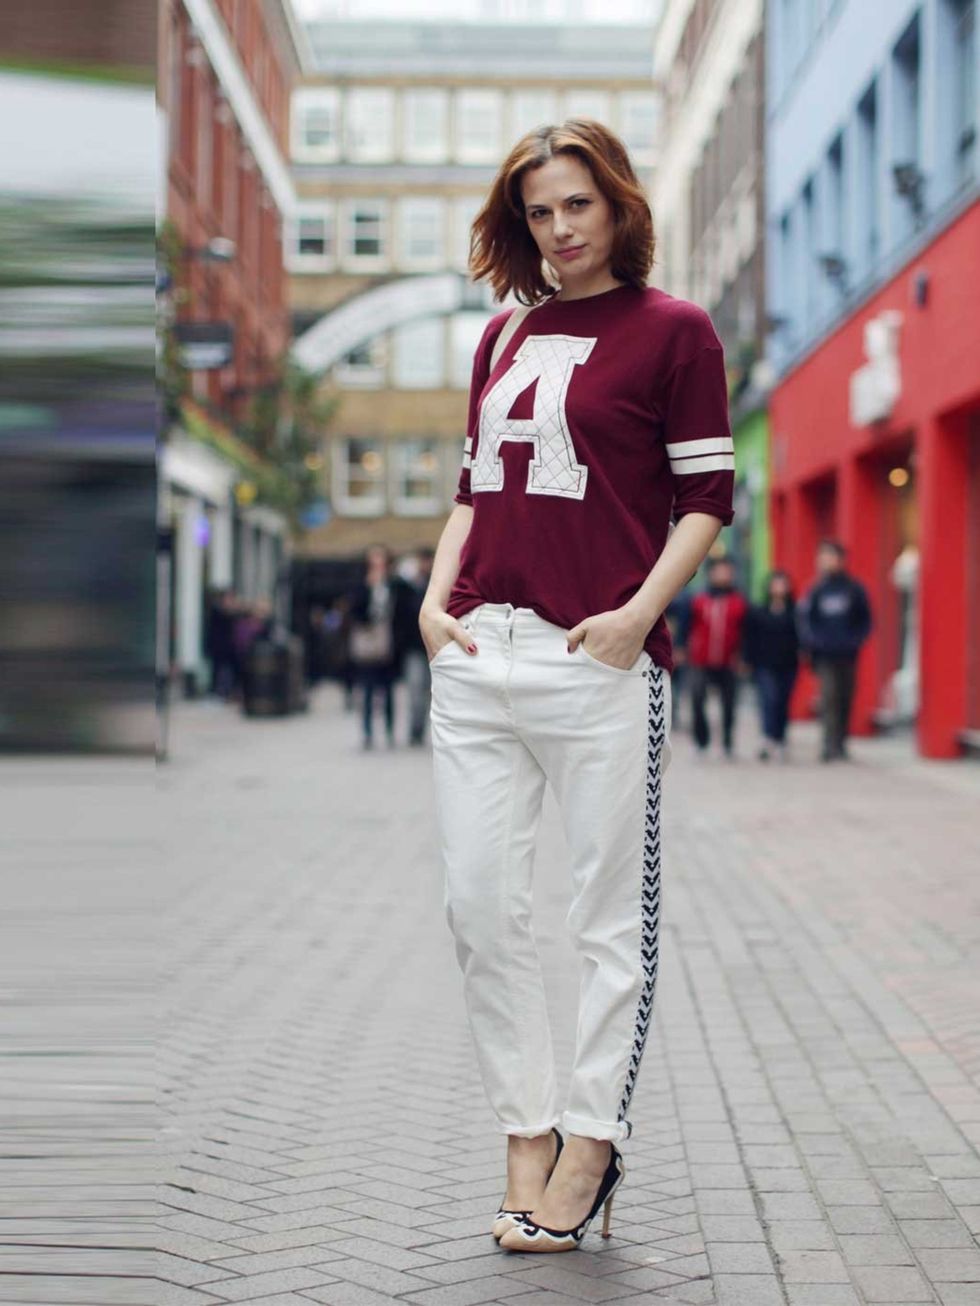 <p><strong>Sophie Beresiner ?- Beauty Director</strong></p><p>Wearing Isabel Marant for H&amp;M trousers £59.99, River Island top, ASOS bag, Faith shoes.</p><p><a href="http://www.elleuk.com/fashion/what-to-wear/isabel-marant-for-hm-lookbook-autumn-winter